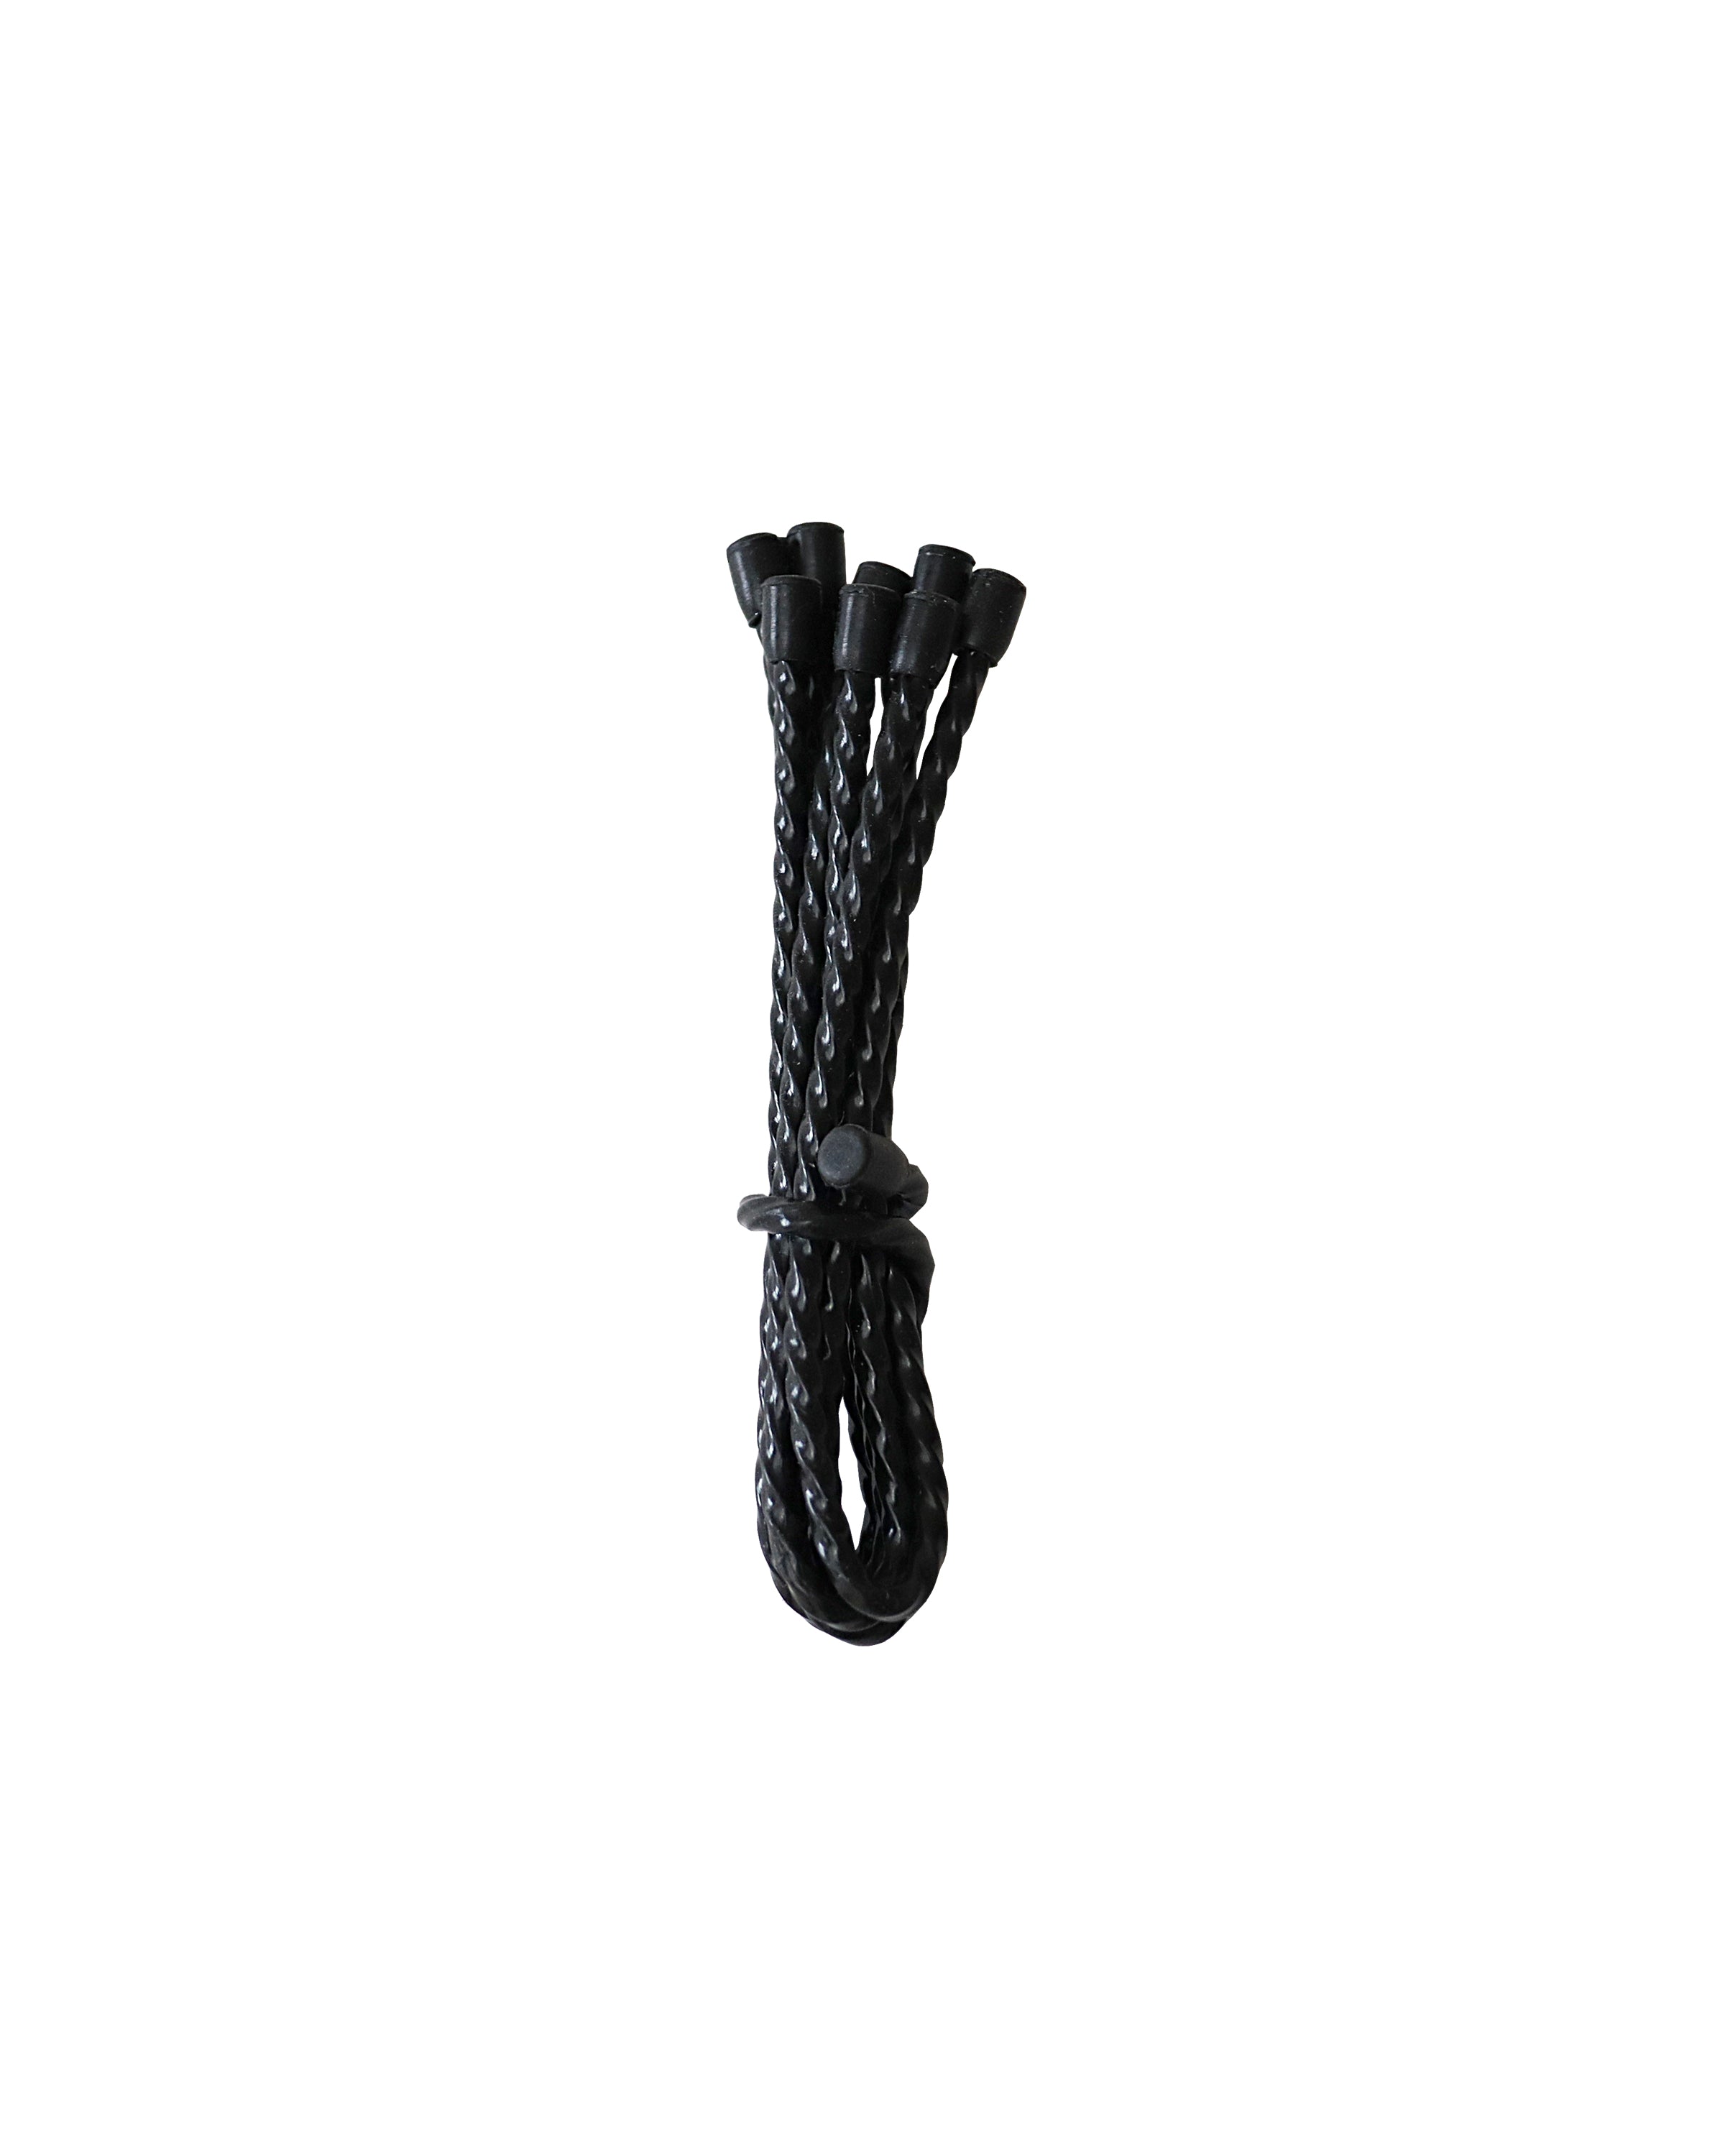 bundle of rubberized twist ties for setting up portable misting system